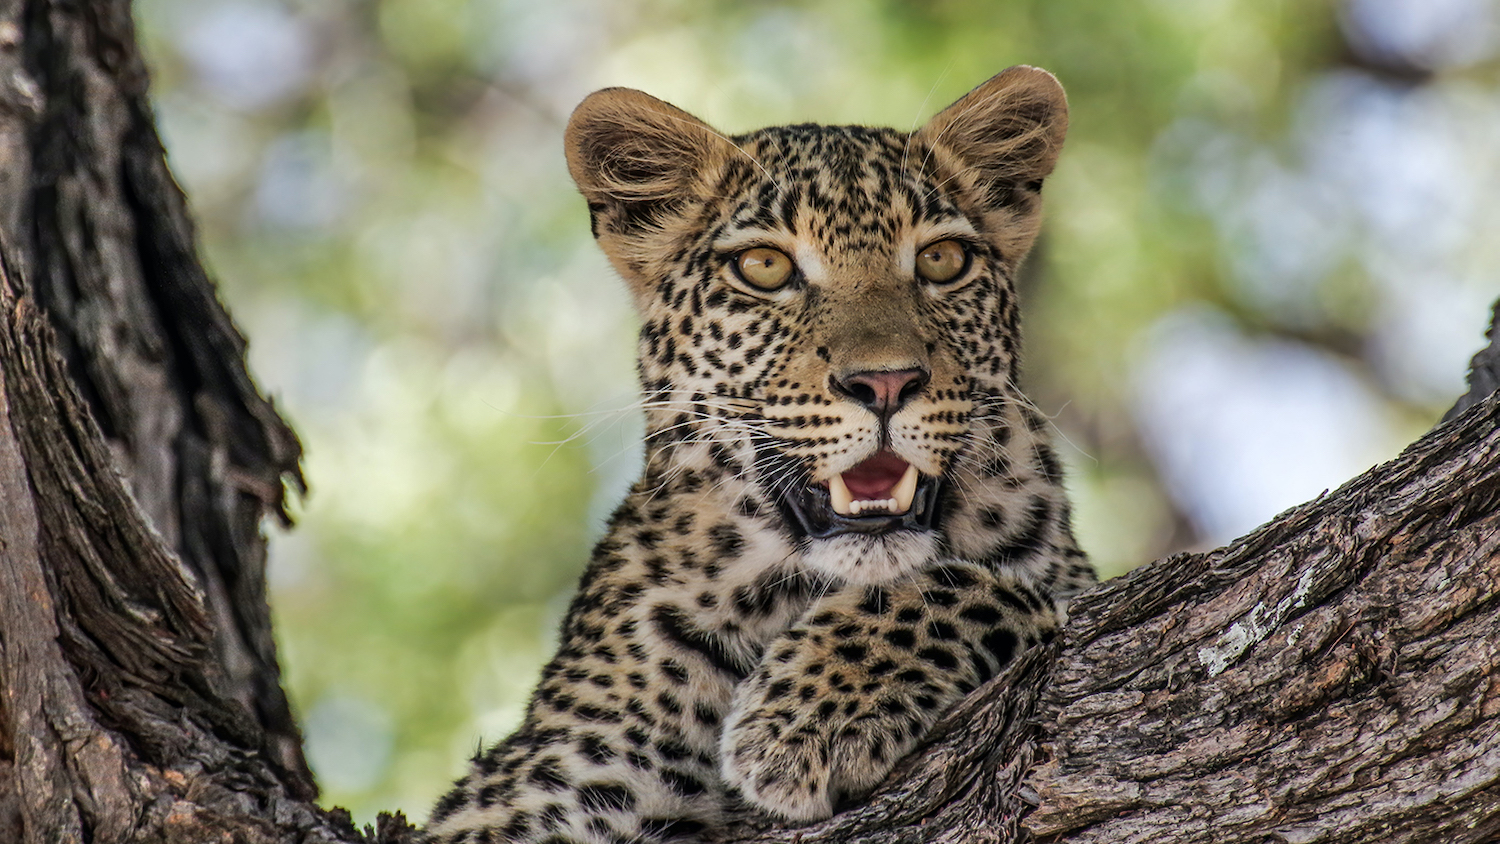 Leopard in Tree - Big Cats in the Backyard - College of Natural Resources News - NC State University